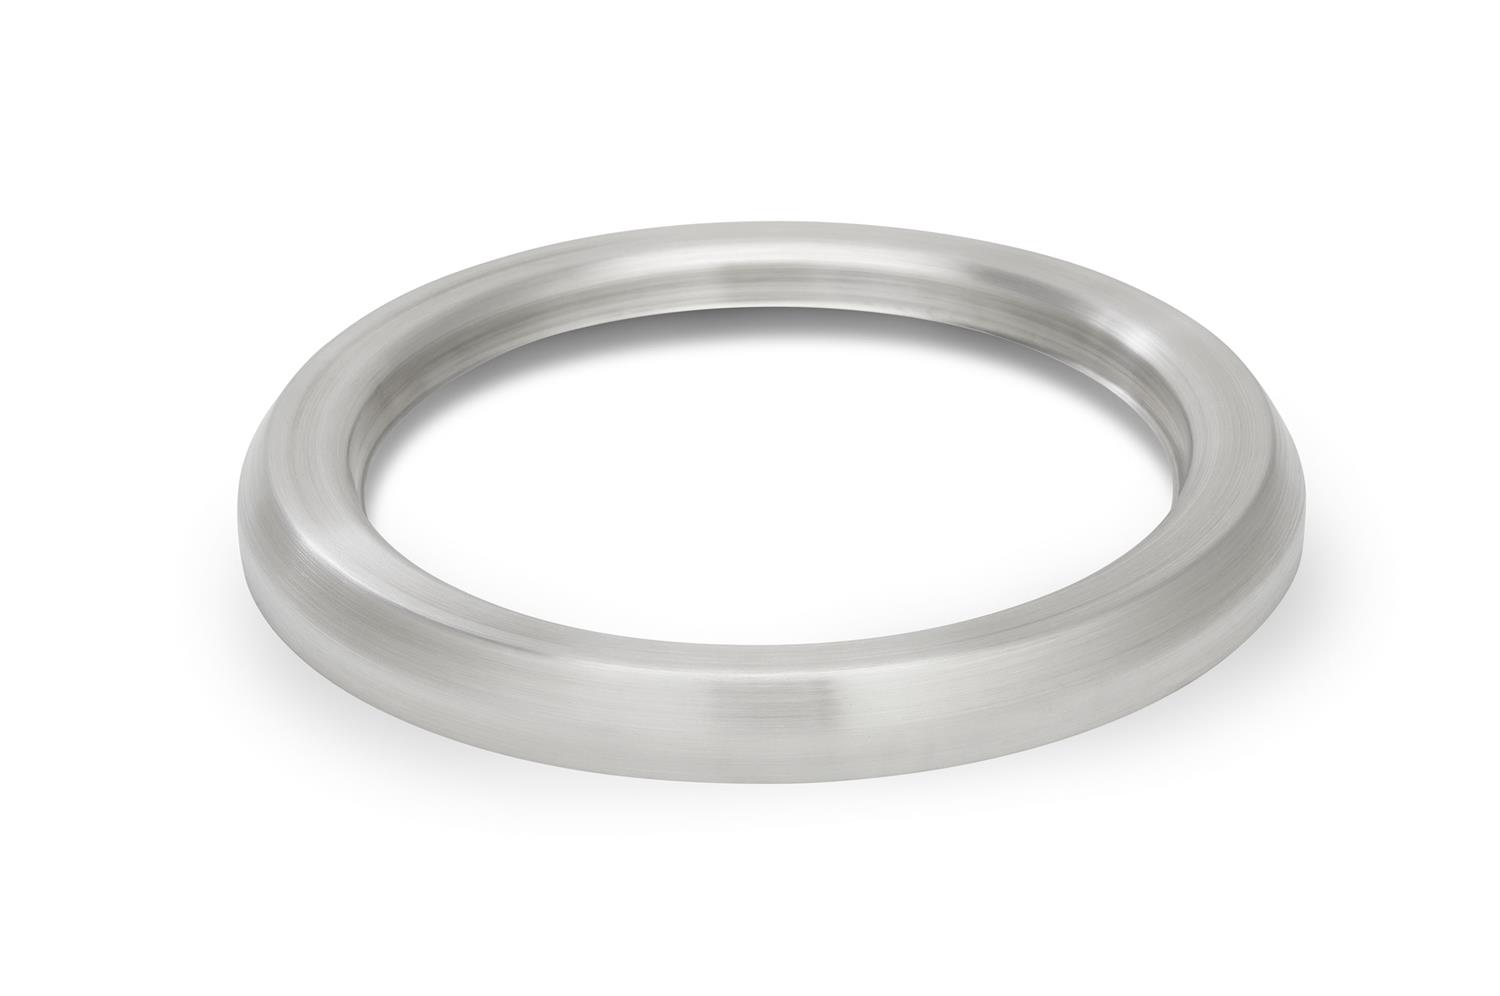 Vollrath 47492 Stainless Steel Decorative Ring